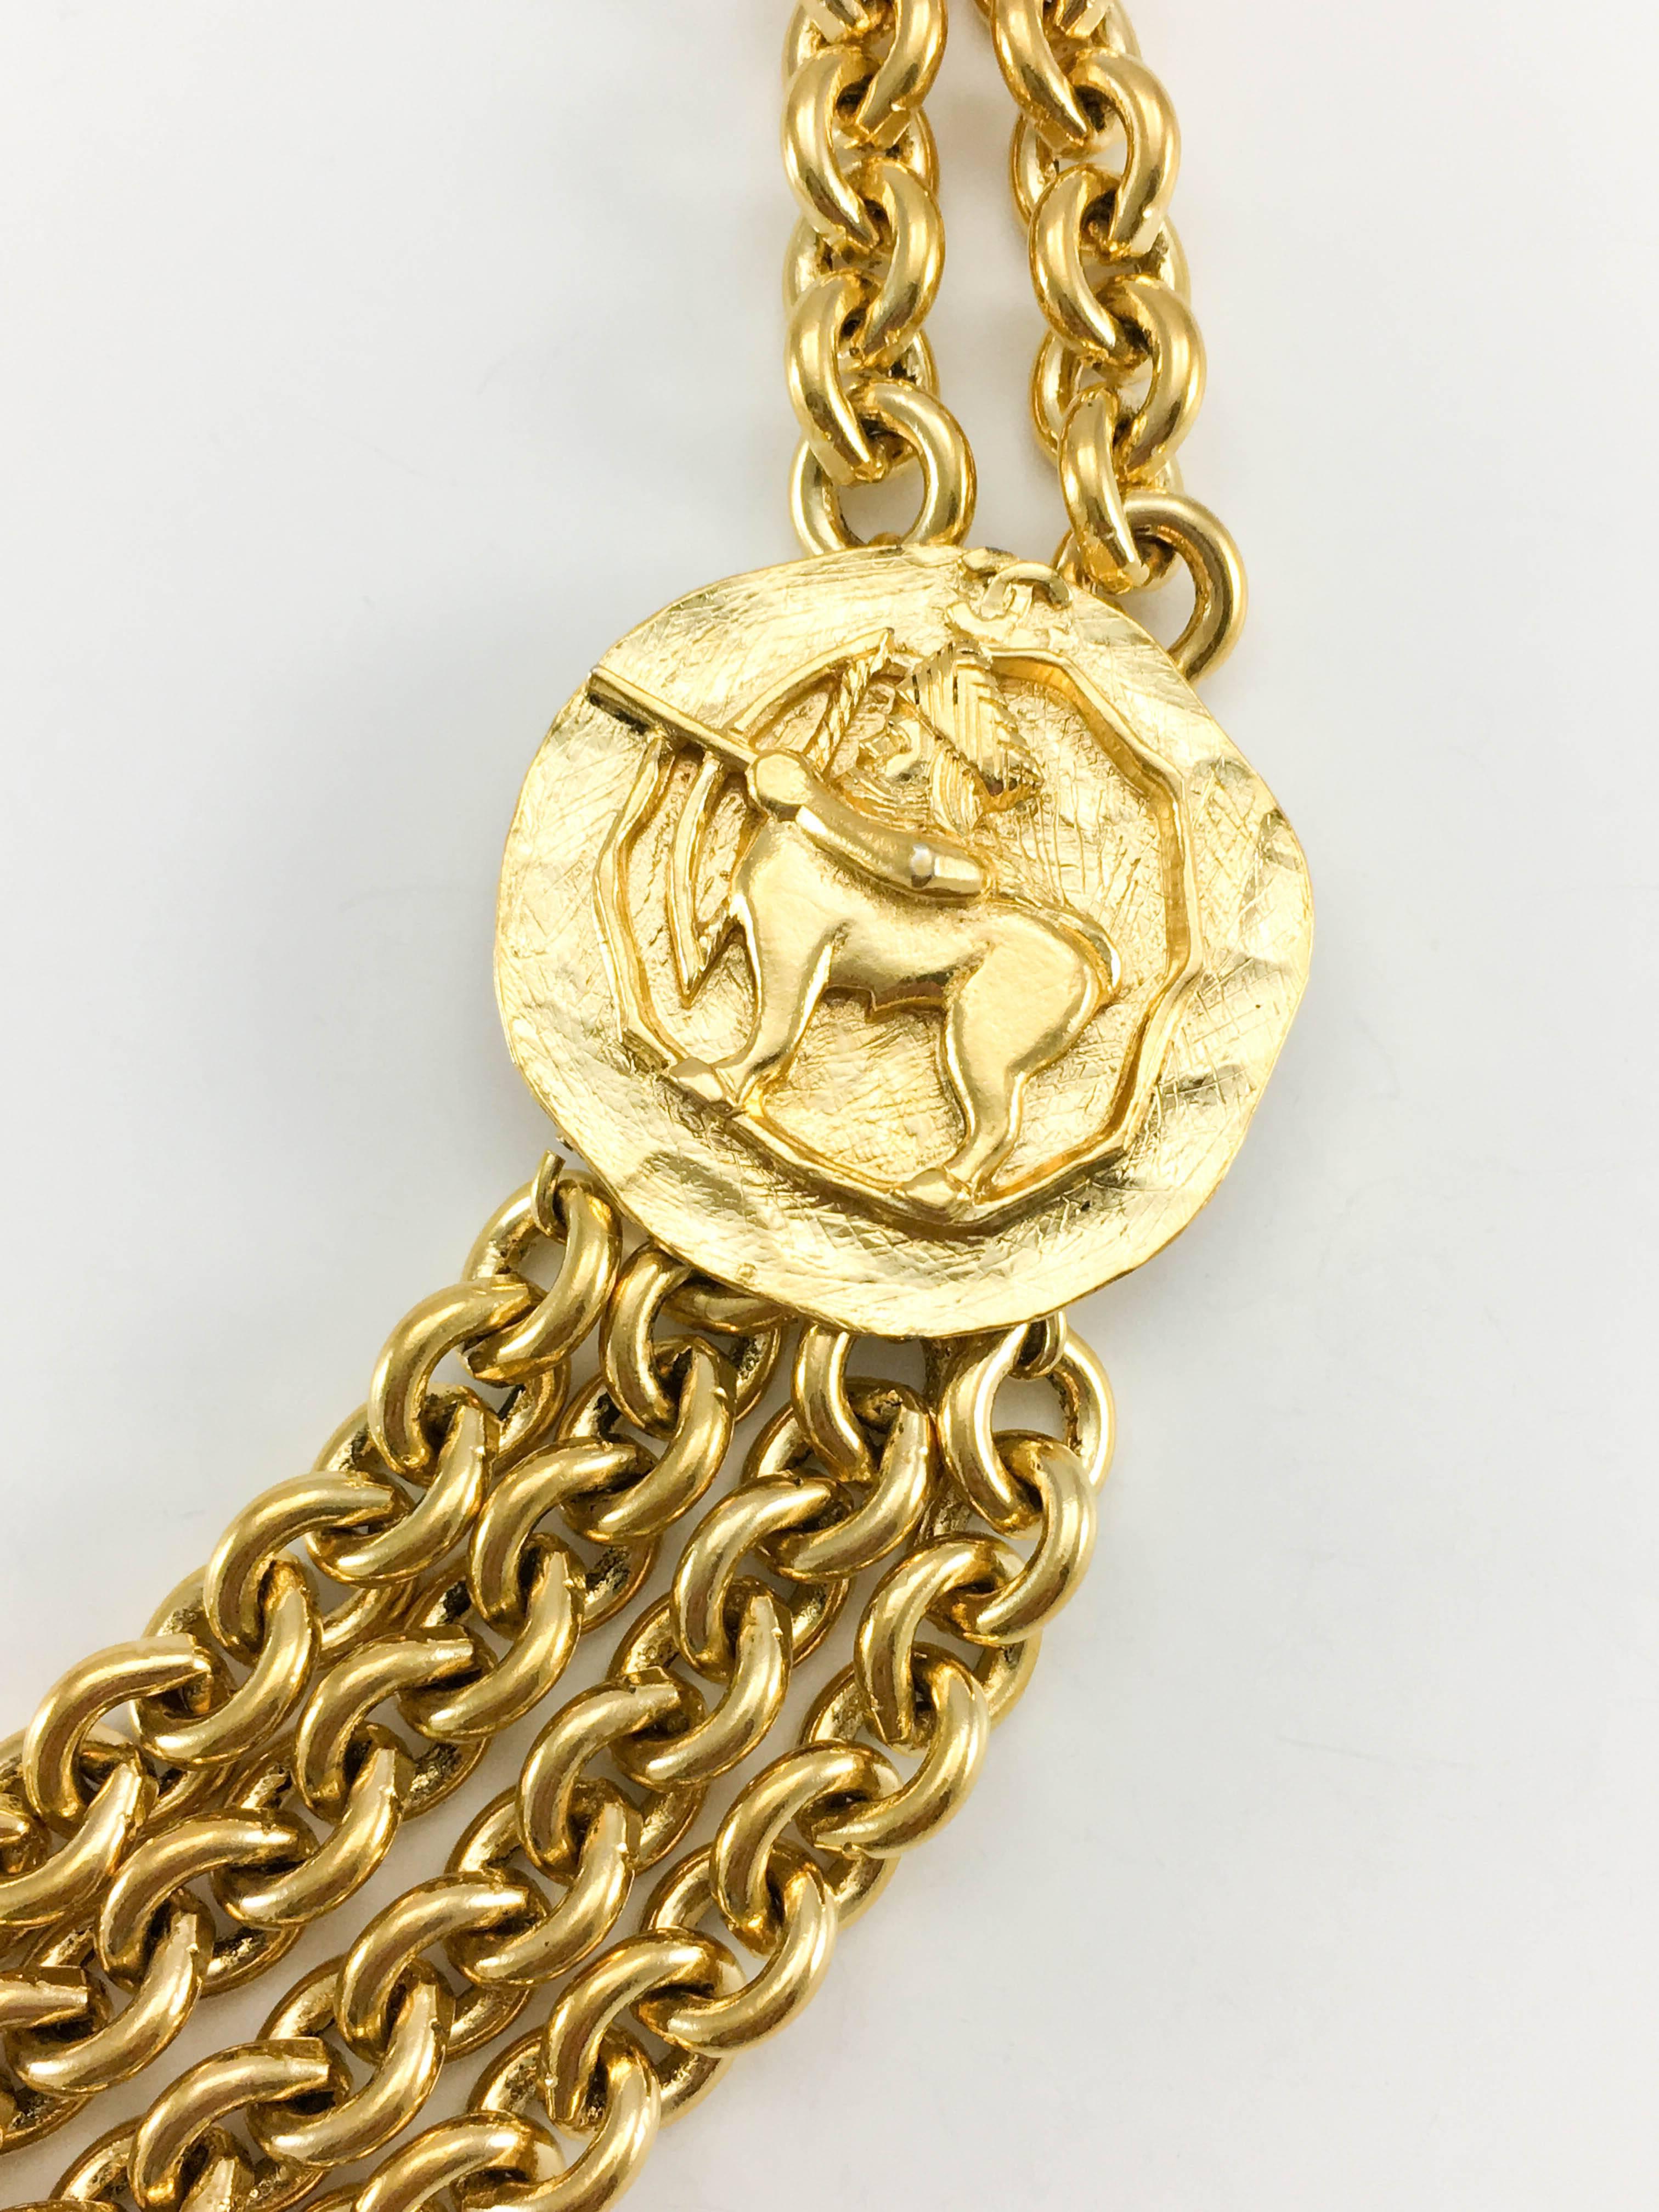 1984 Chanel Centaur Medallion Chain Necklace In Excellent Condition For Sale In London, Chelsea